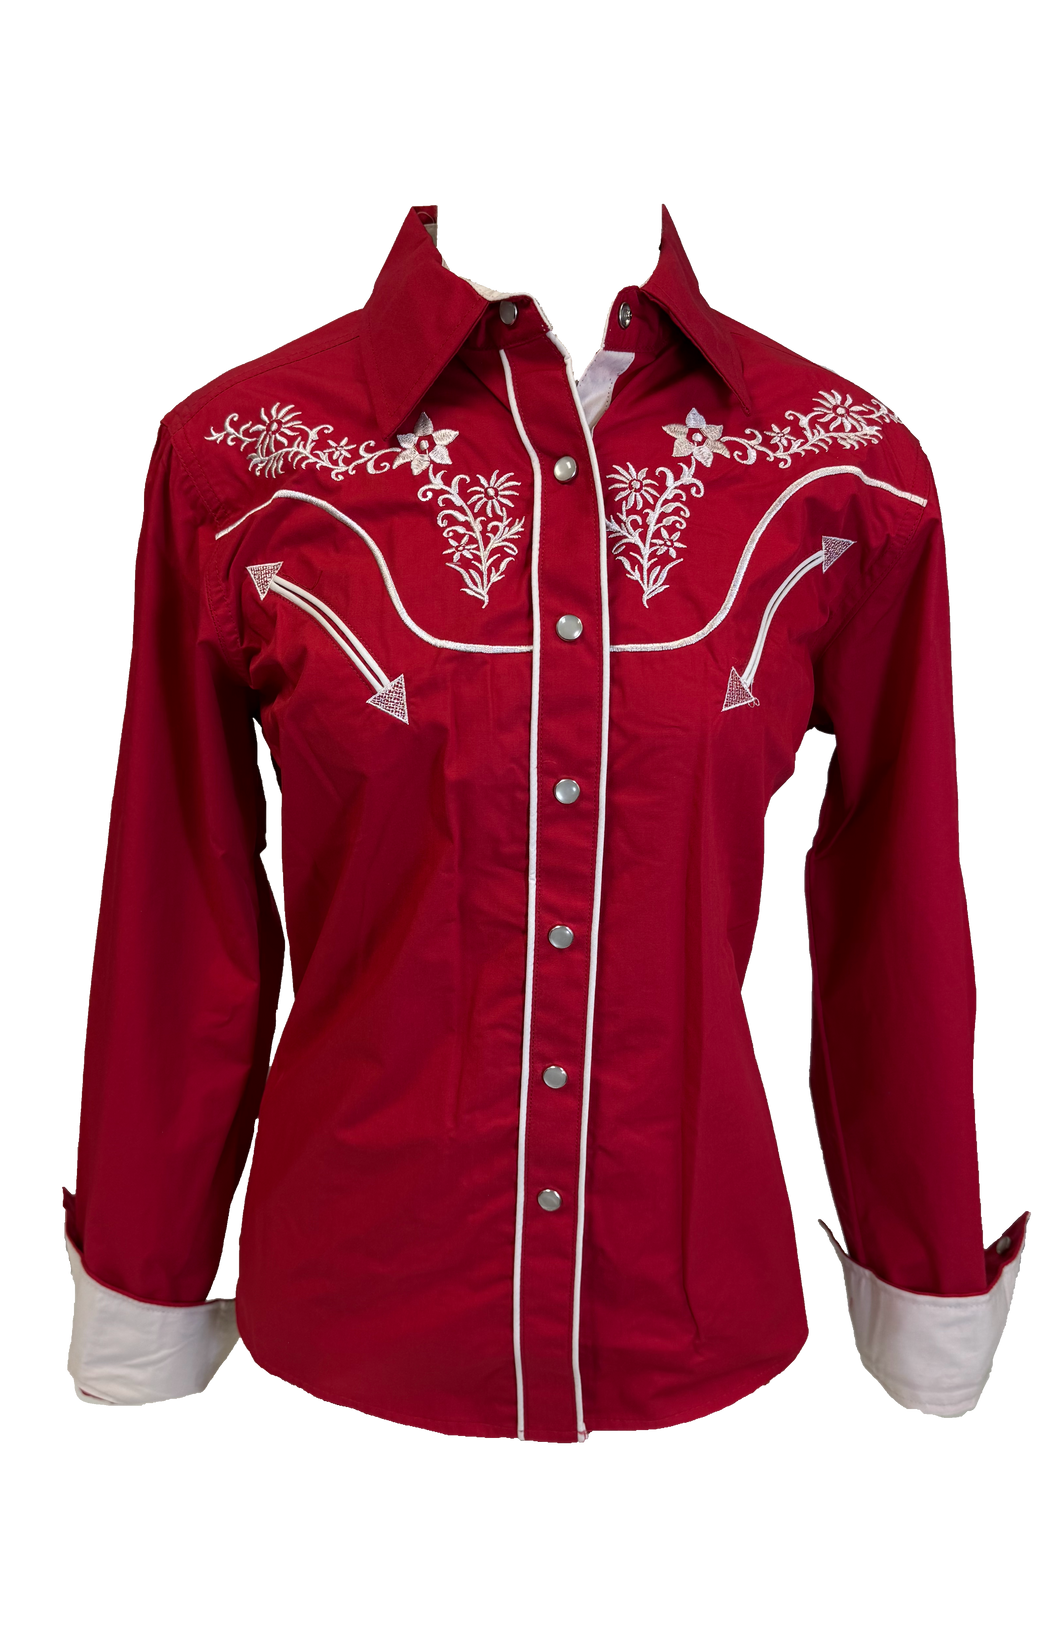 LADIES BUCKEROO SHIRTS: RED WHITE FLORAL STITCH PEARL SNAP